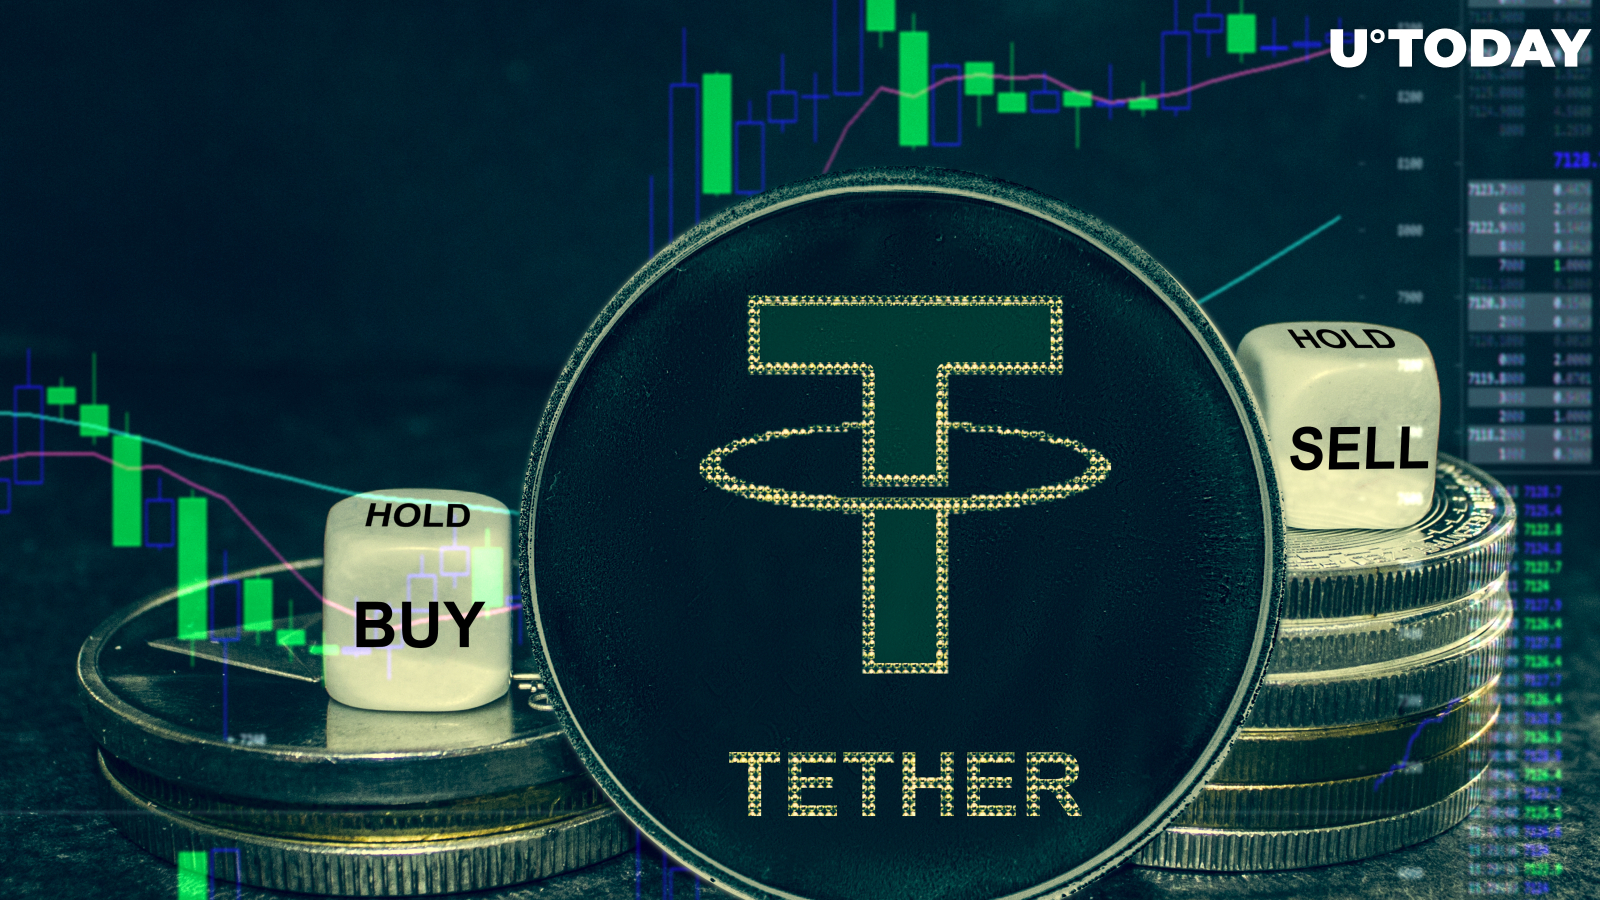 Tether's (USDT) Circulating Supply Skyrockets as Volatility Comes to a Head